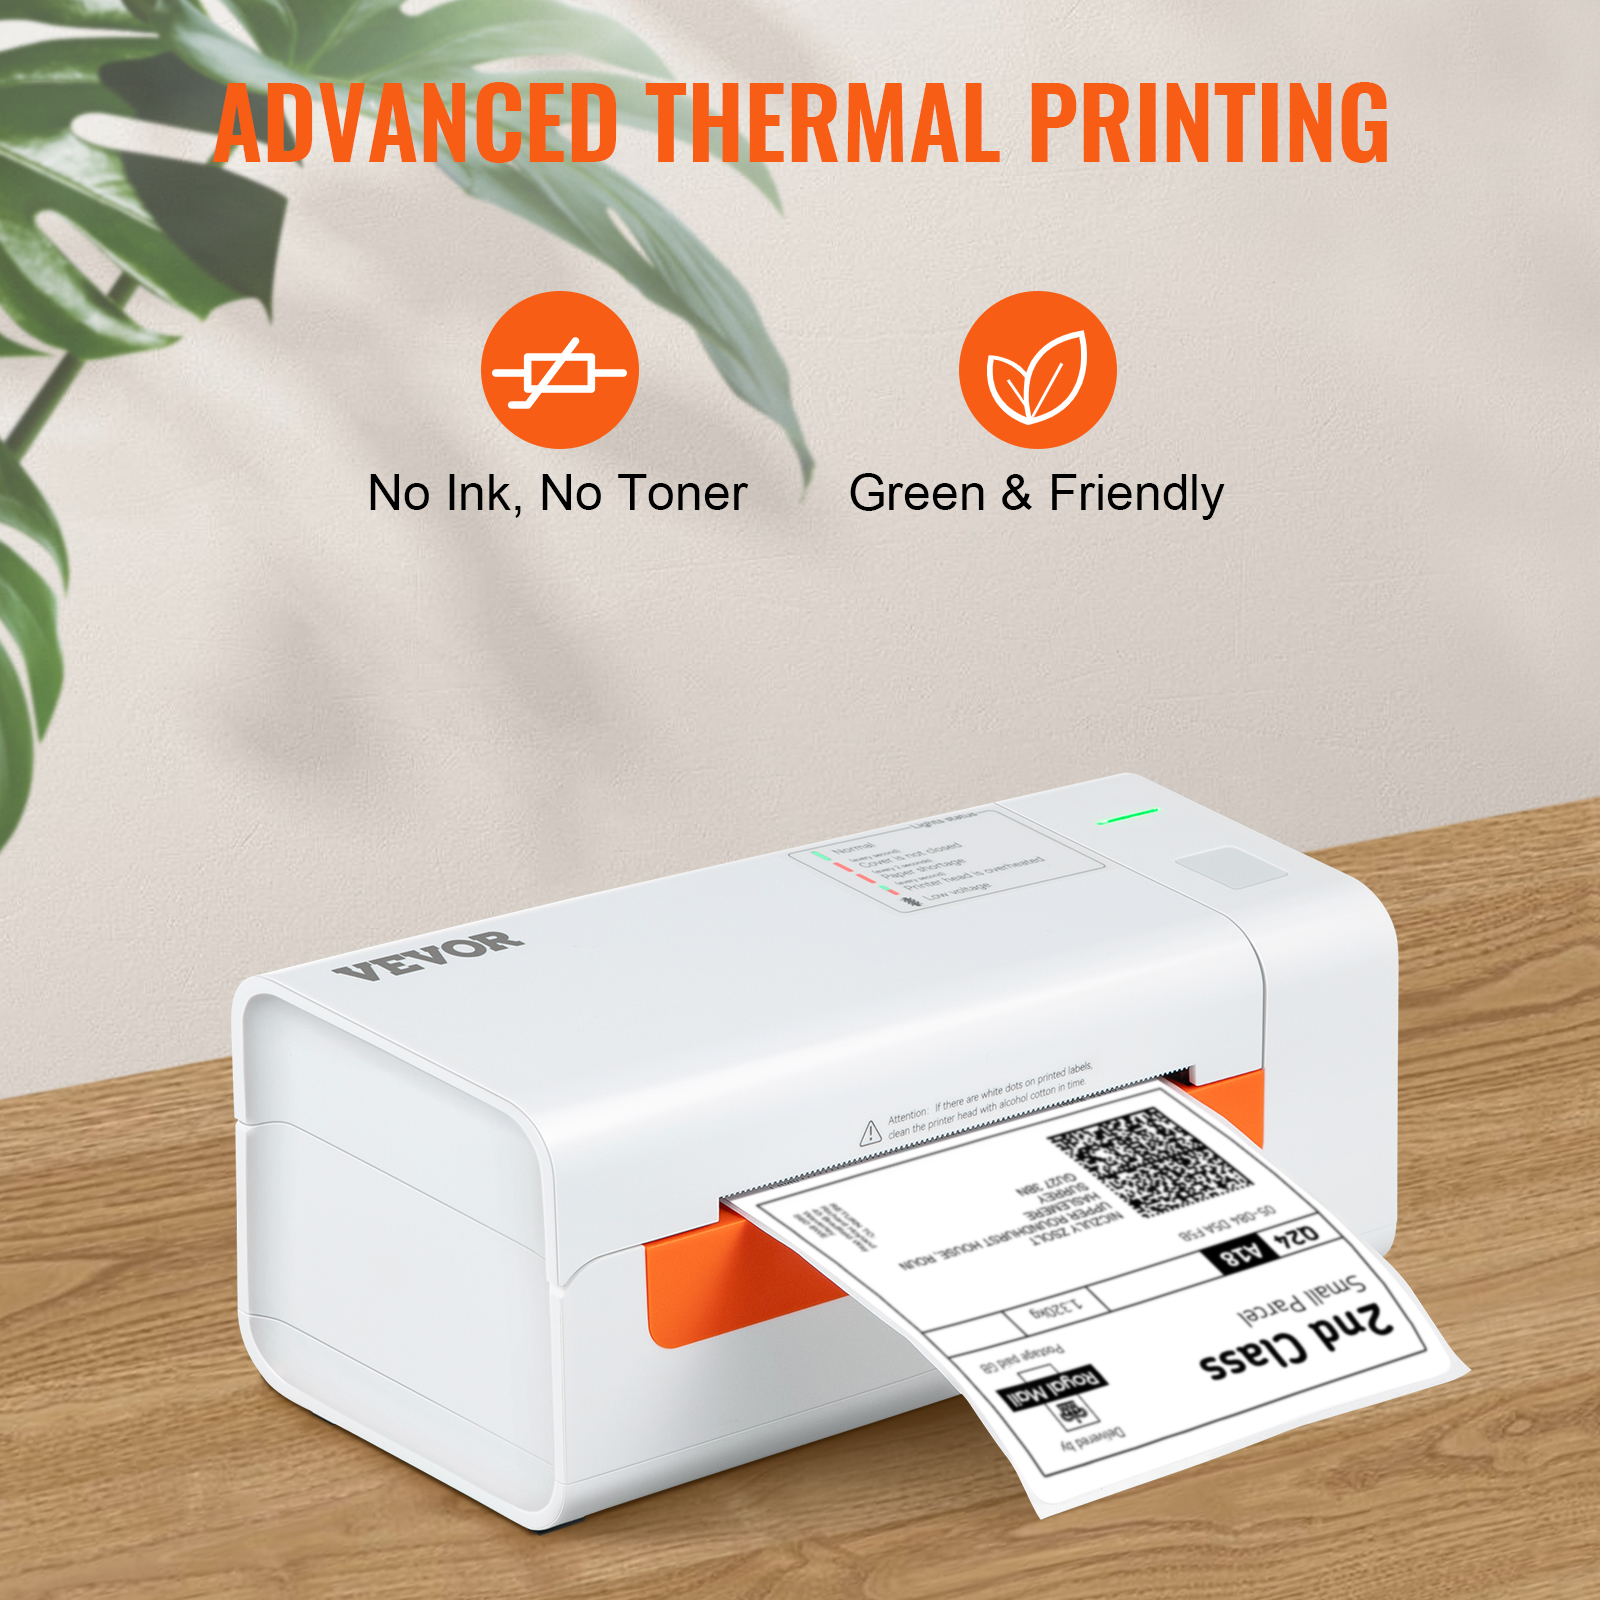 VEVOR Thermal Label Printer, Shipping Label Printer for Width of 1.57 -  4.25 Labels, w/Japanese Rohm Printer Head & Auto Label Recognition,Thermal  Printer Supports Shipping, Barcode, Household Labels and More